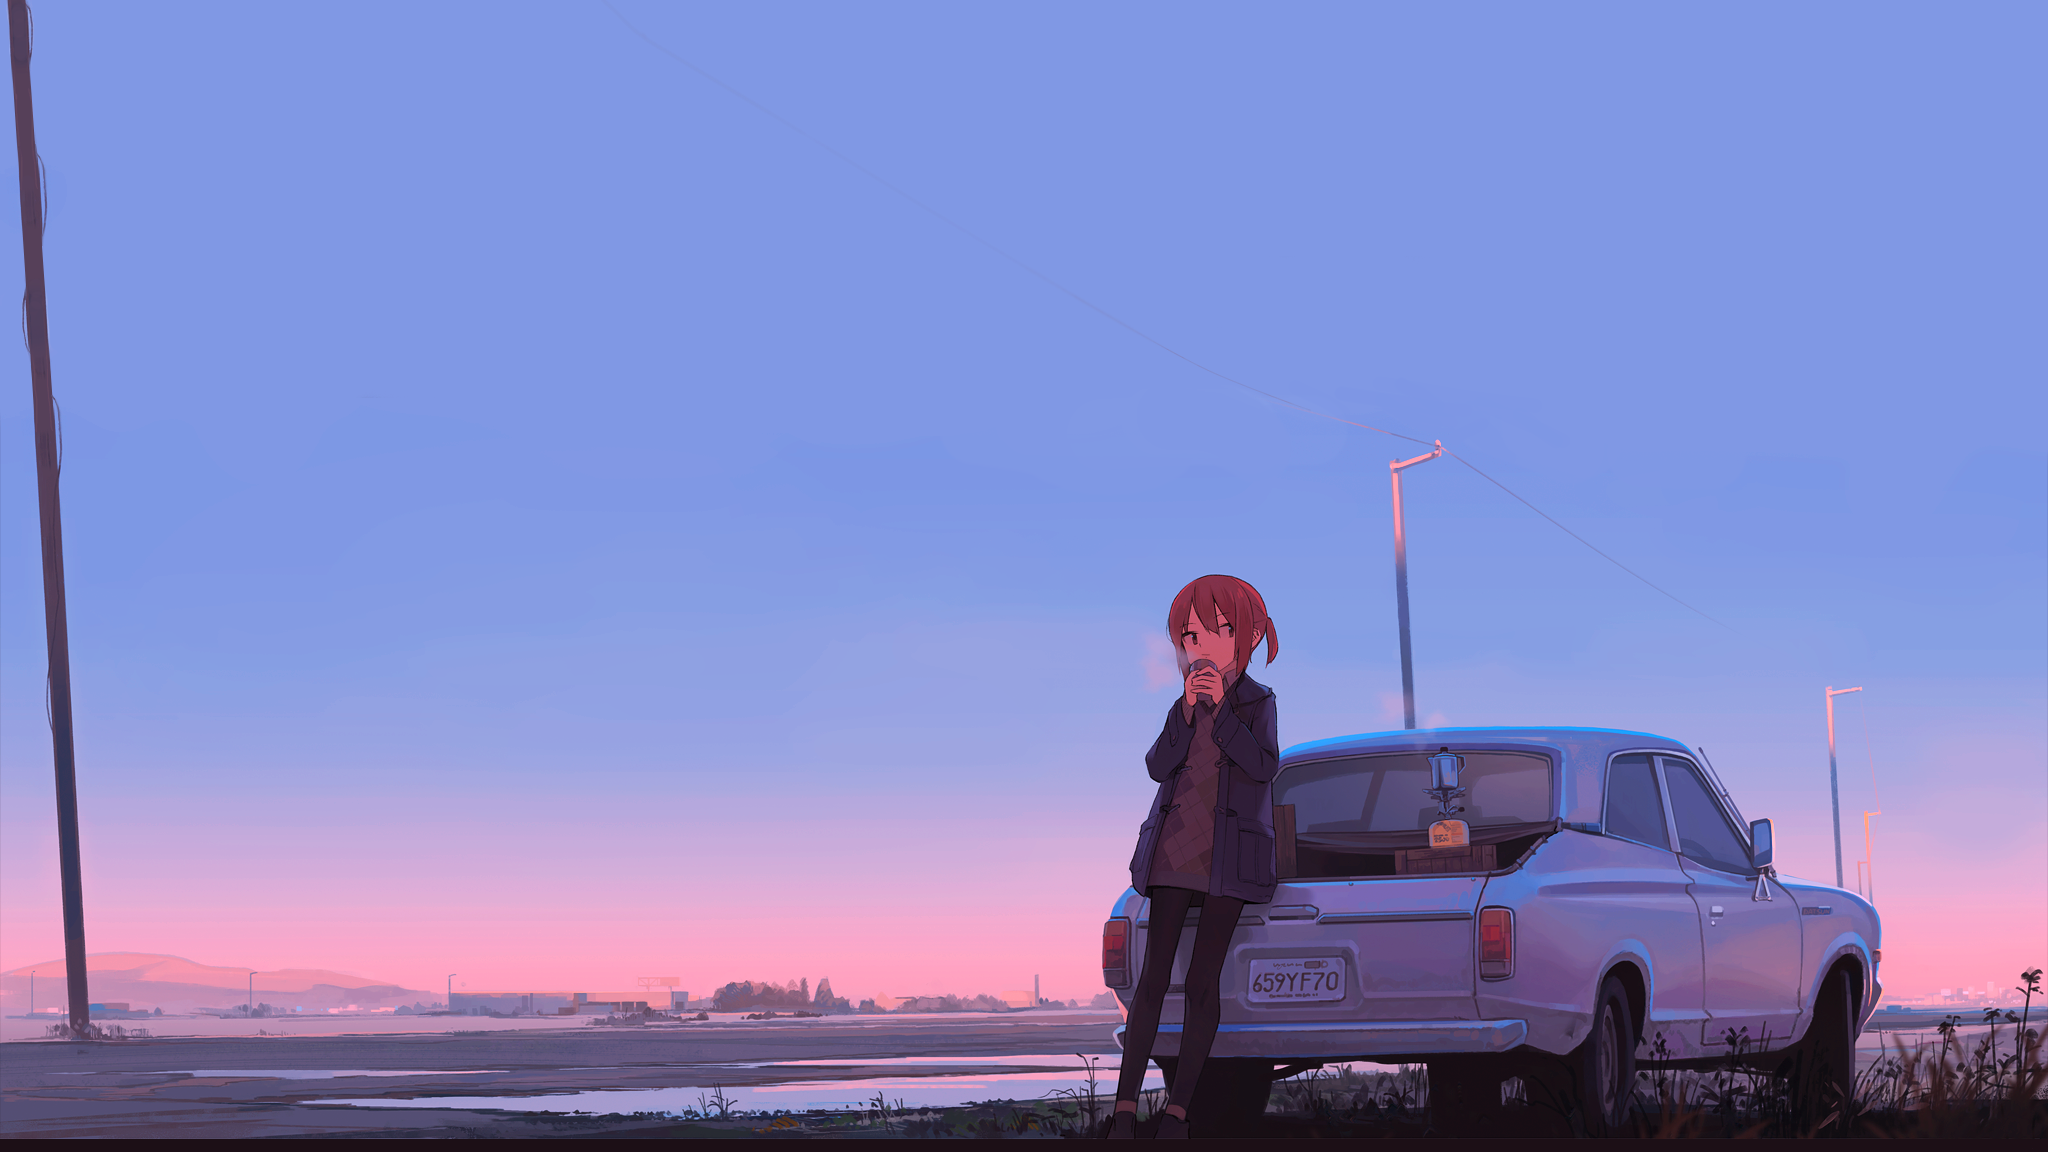 Anime 2048x1152 car sunset anime girls original characters moescape short hair redhead coffee winter Dangerdrop women with cars Pixiv numbers vehicle women outdoors sky anime